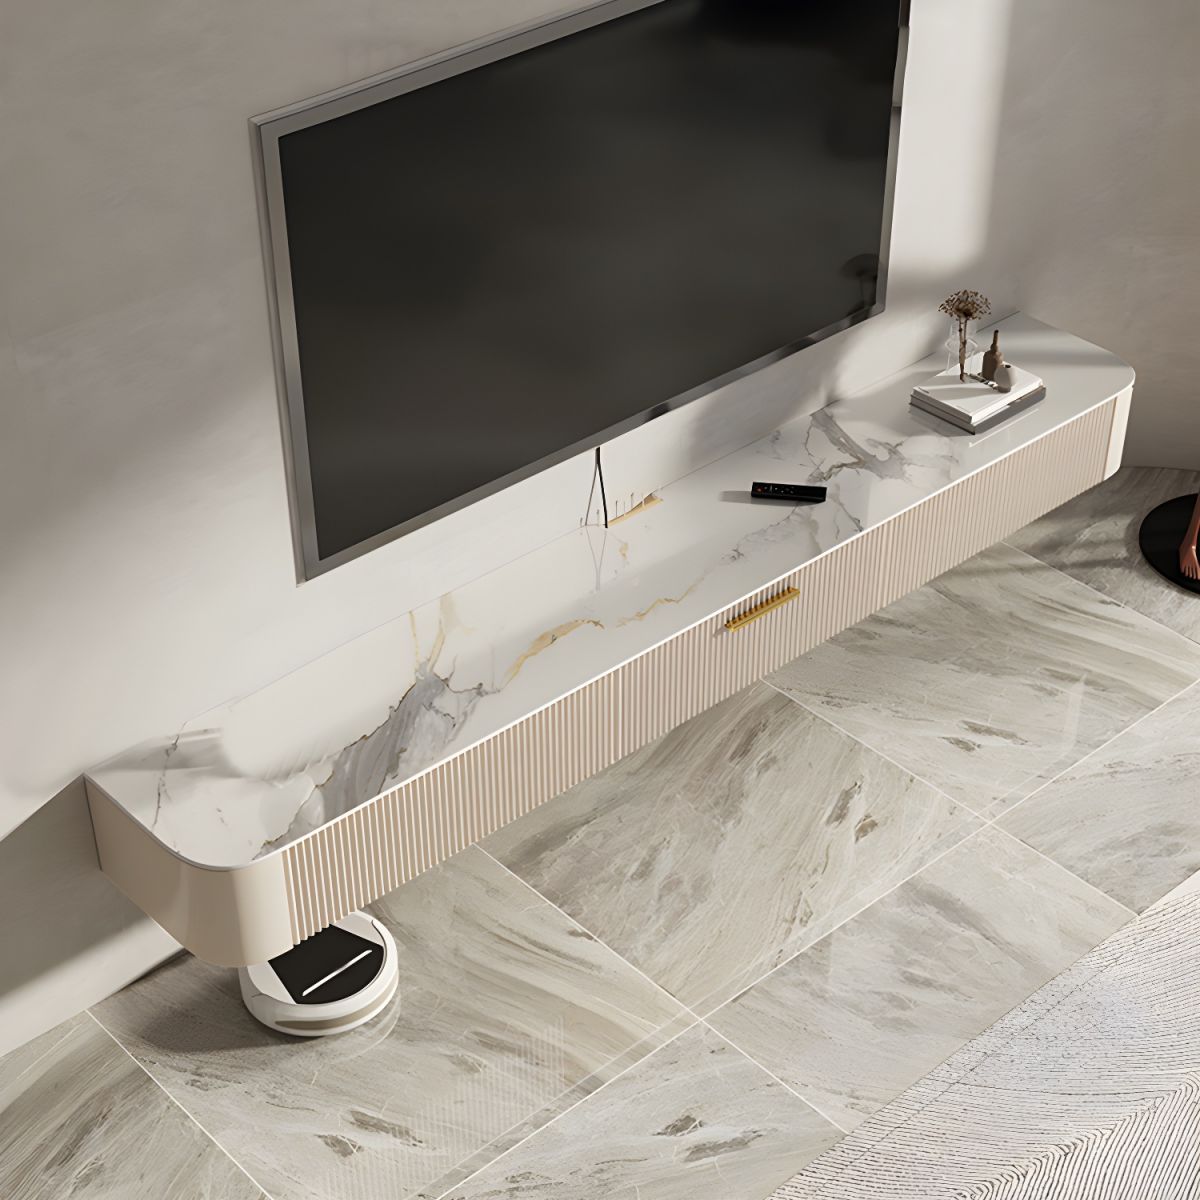 71" Modern Beige  Floating TV Stand with Enclosed Drawers Storage  Media Console for 75" 80" TVs